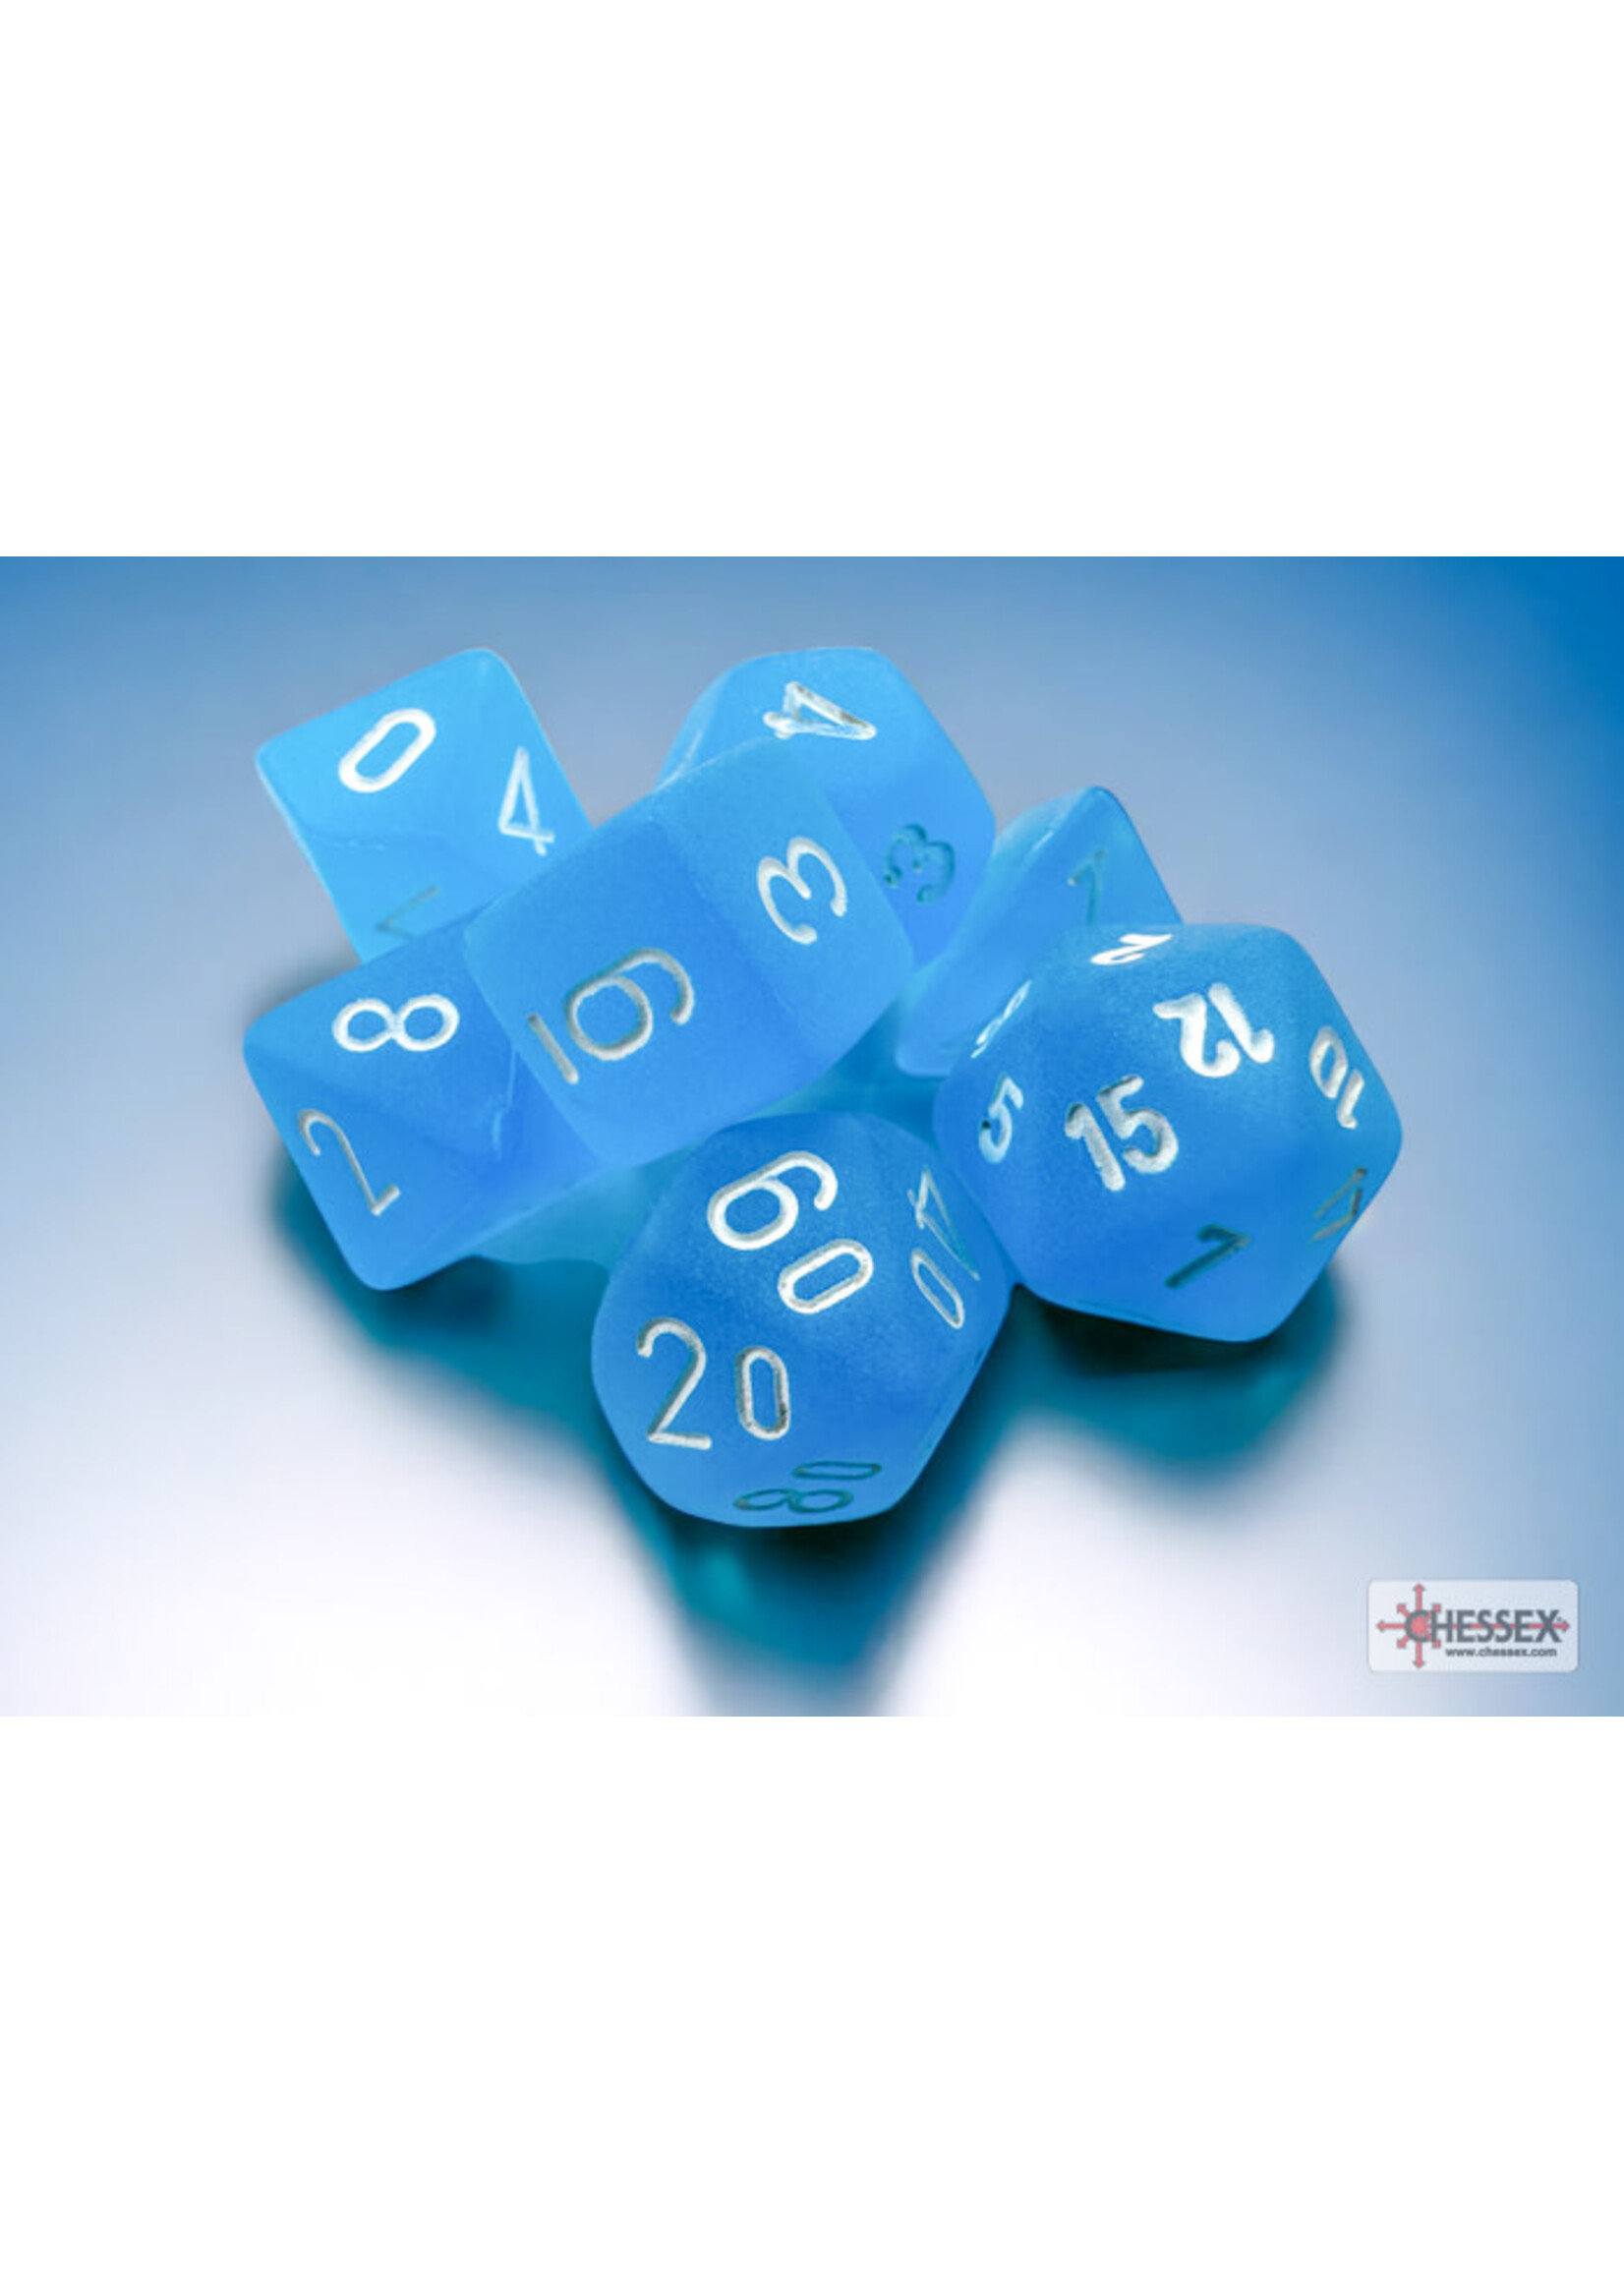 MINI FROSTED 7-DIE SET CARIBBEAN BLUE/WHITE - CHESSEX